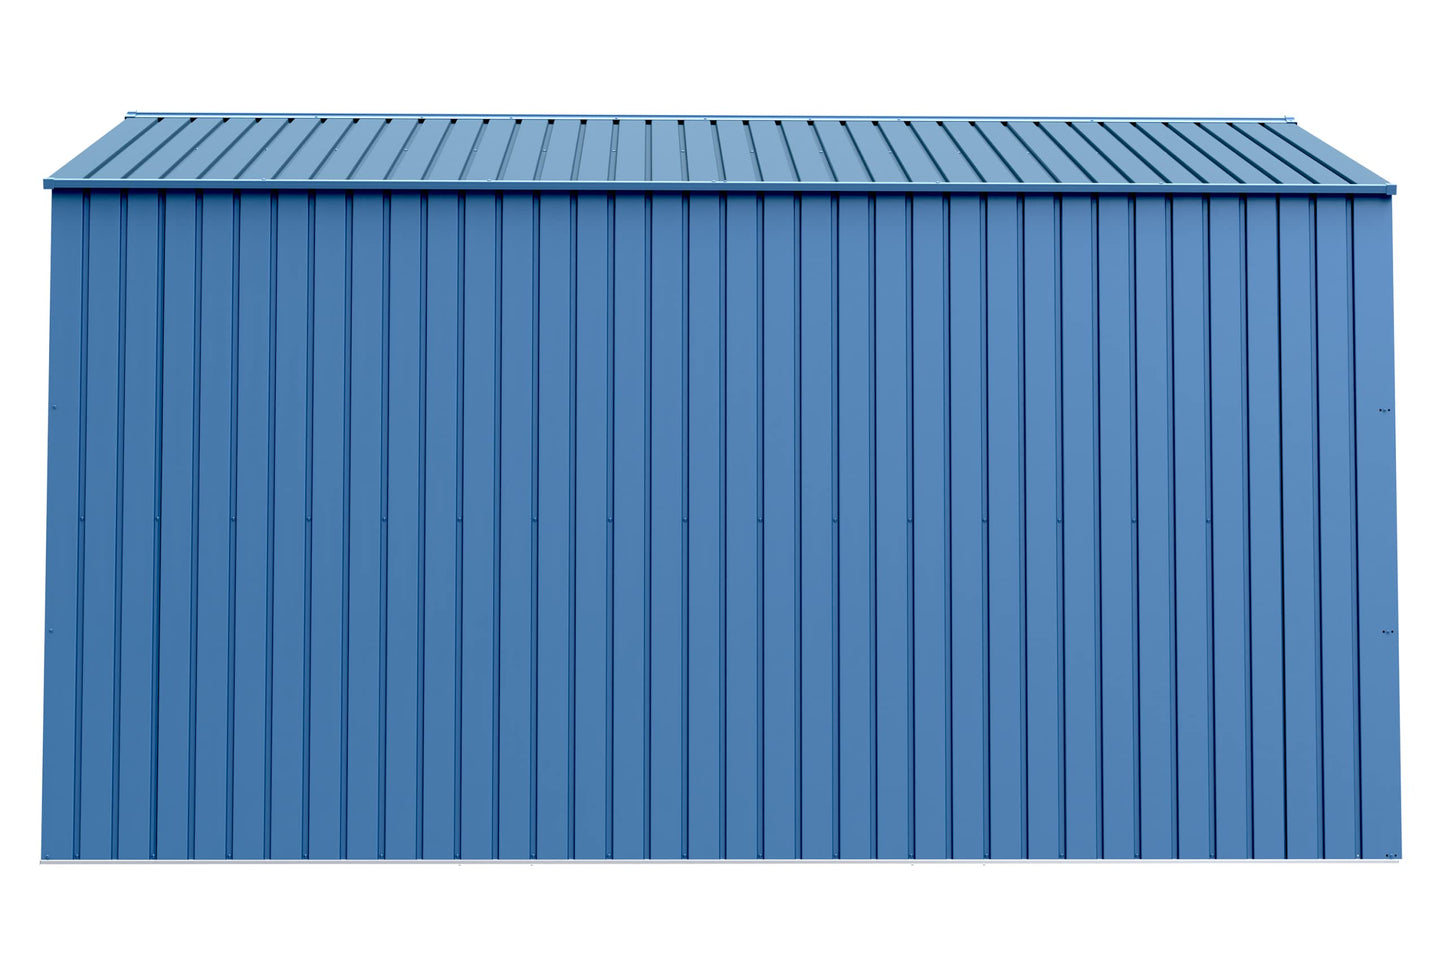 Arrow Shed Elite 10' x 14' Outdoor Lockable Gable Roof Steel Storage Shed Building, Blue Grey